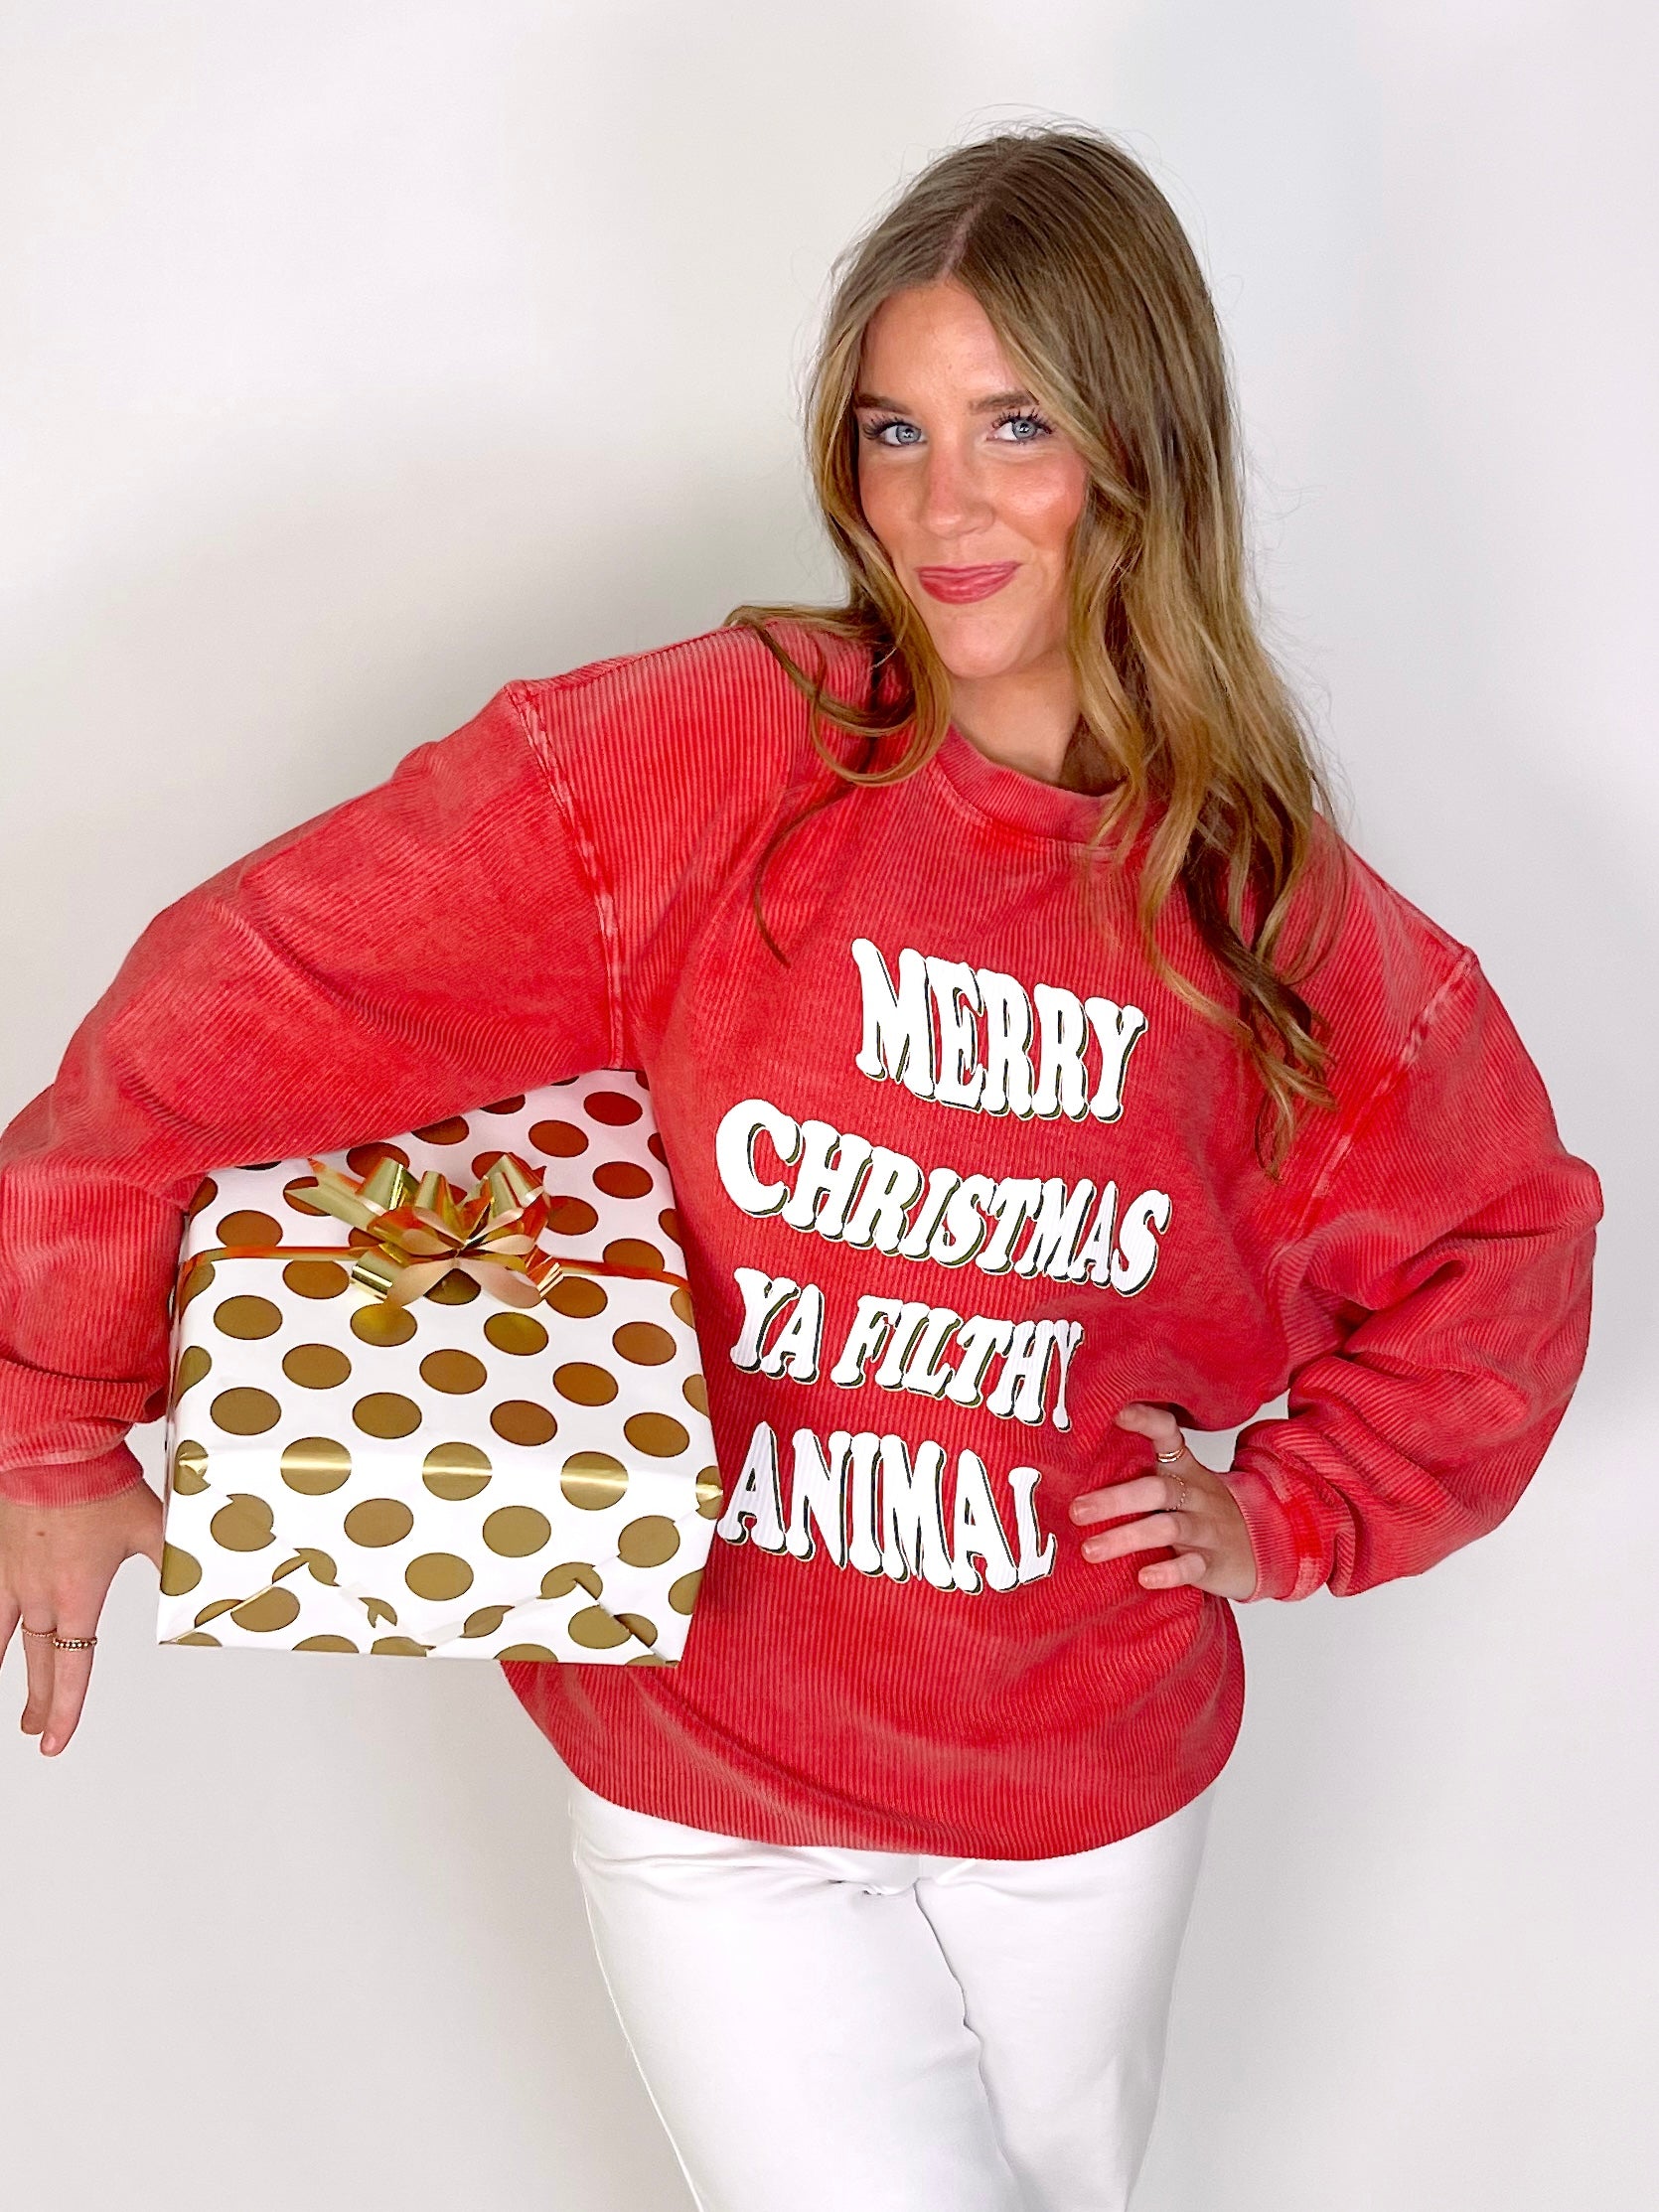 Merry Christmas Ya Filthy Animal Corded Sweatshirt-Sweatshirt-Charlie Southern-The Village Shoppe, Women’s Fashion Boutique, Shop Online and In Store - Located in Muscle Shoals, AL.